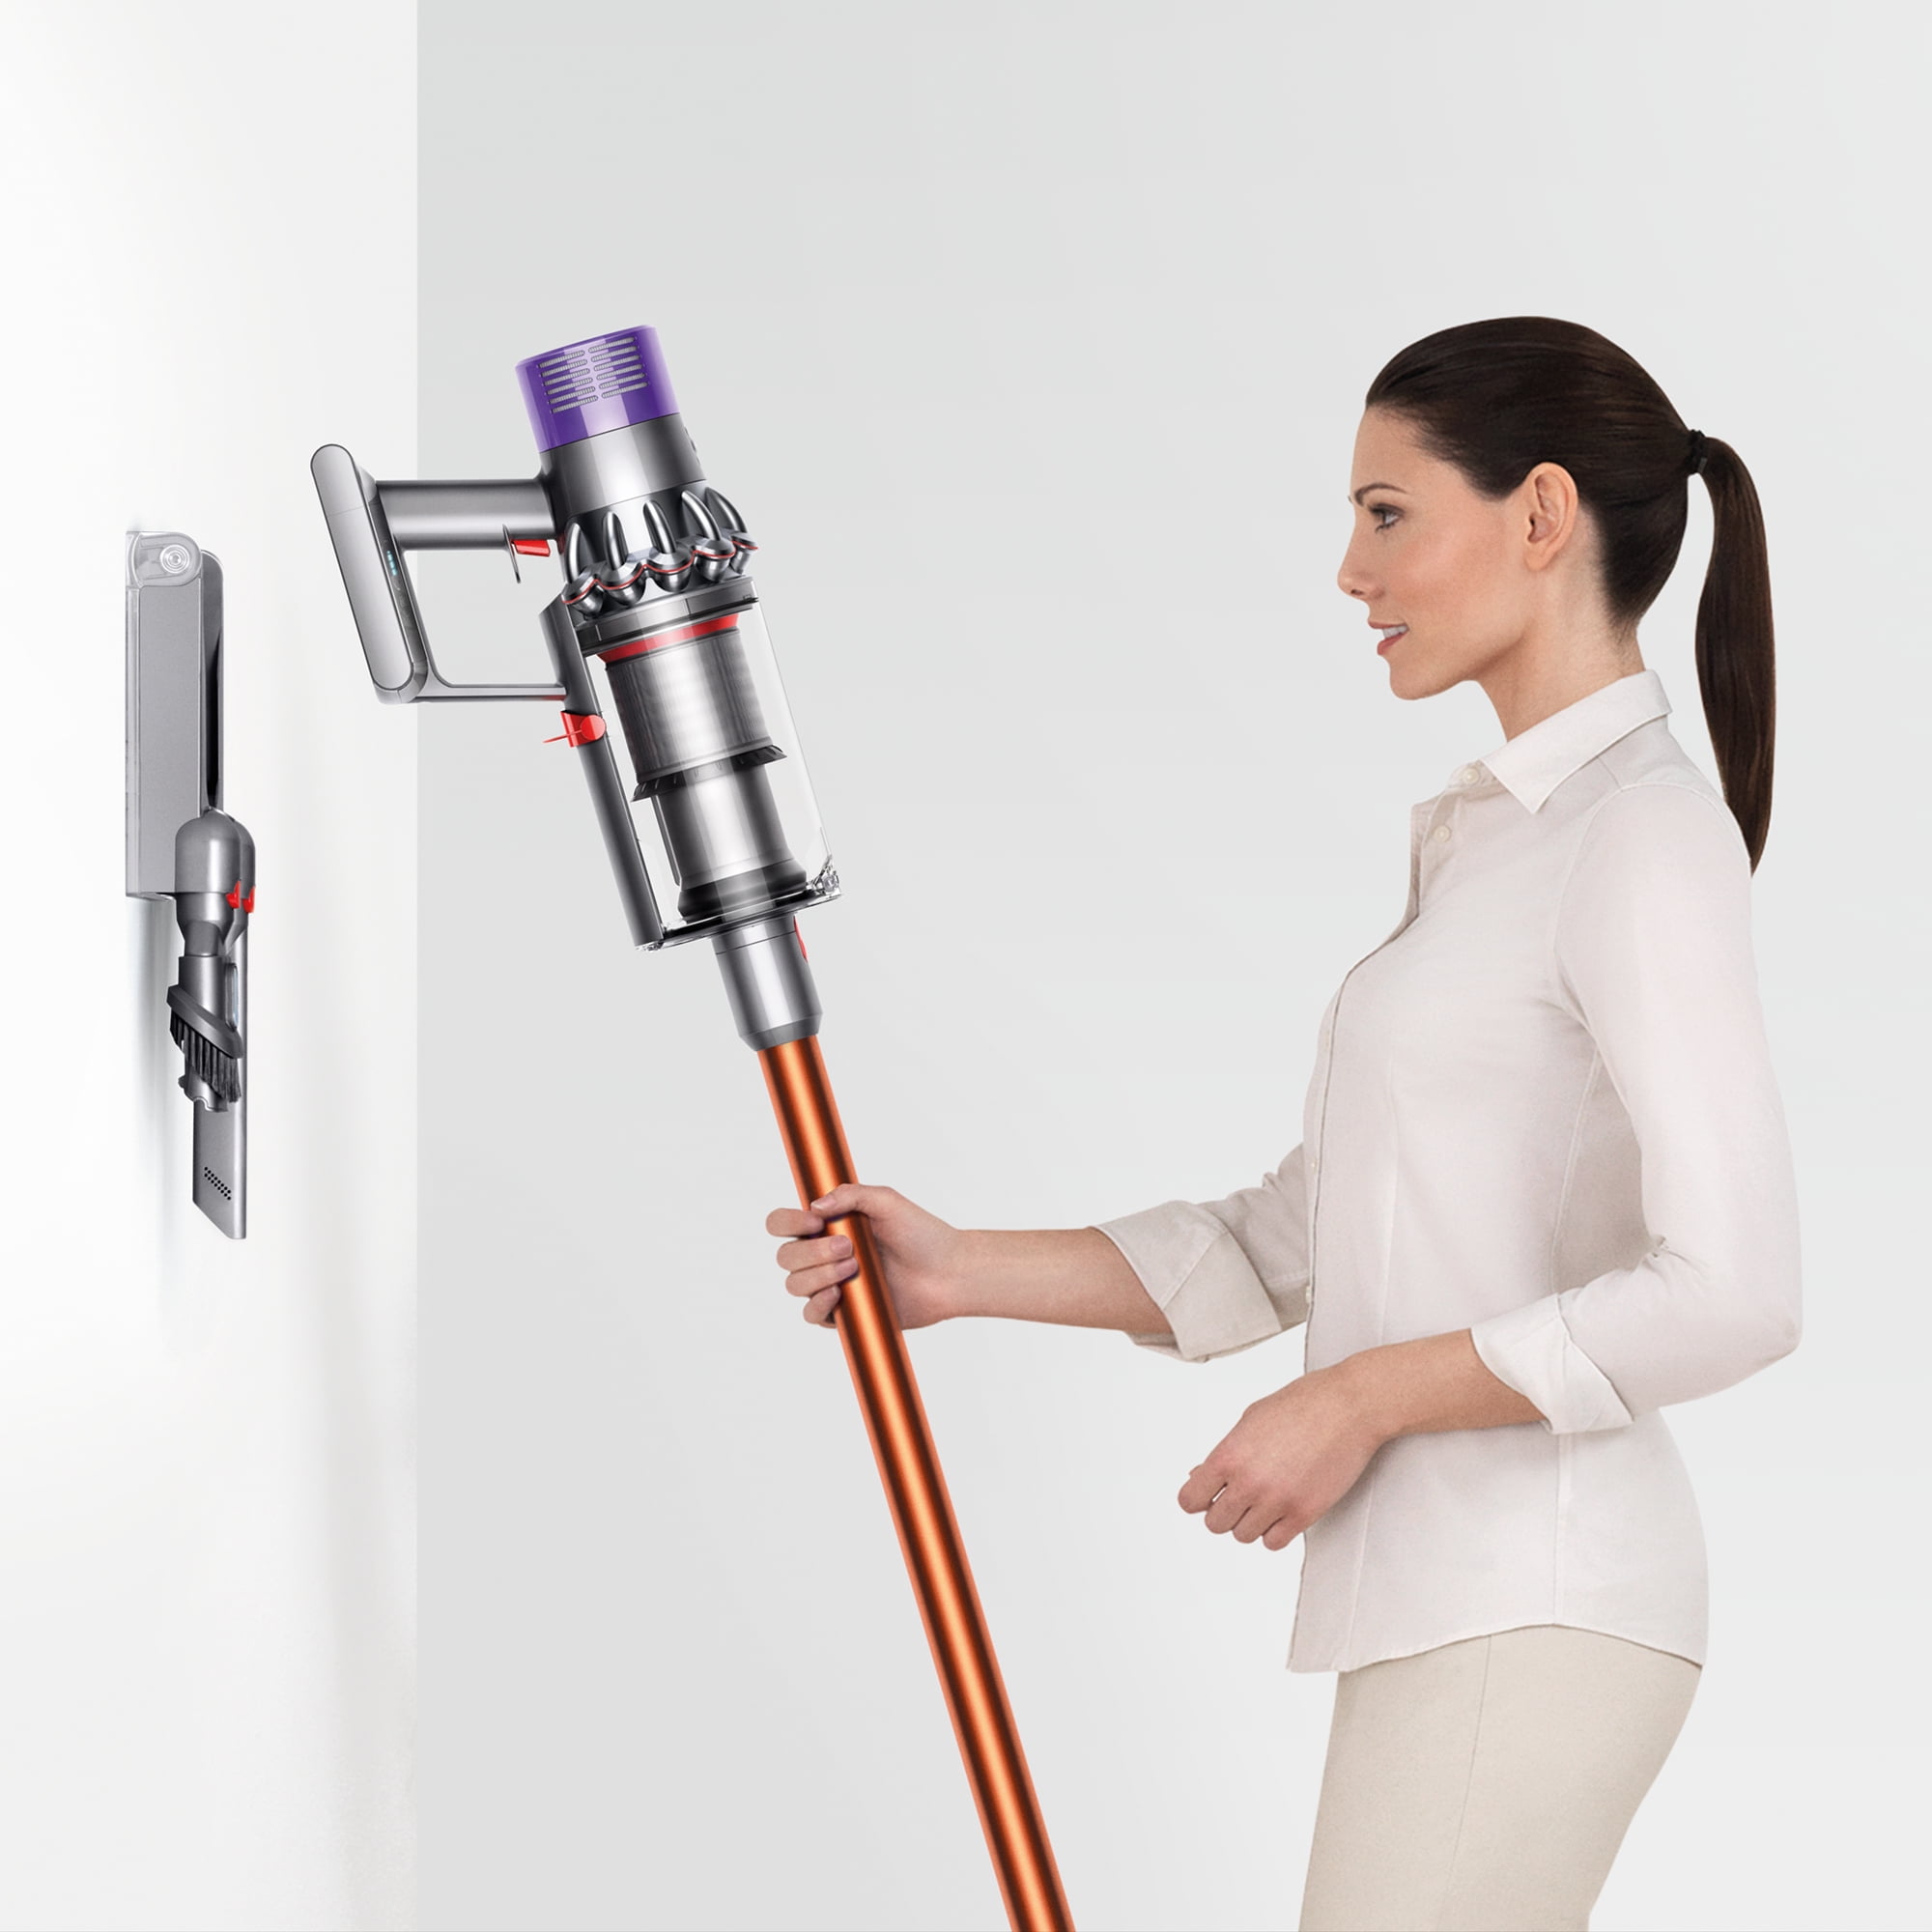 Dyson's Cyclone V10 stick vac has amped up power - CNET